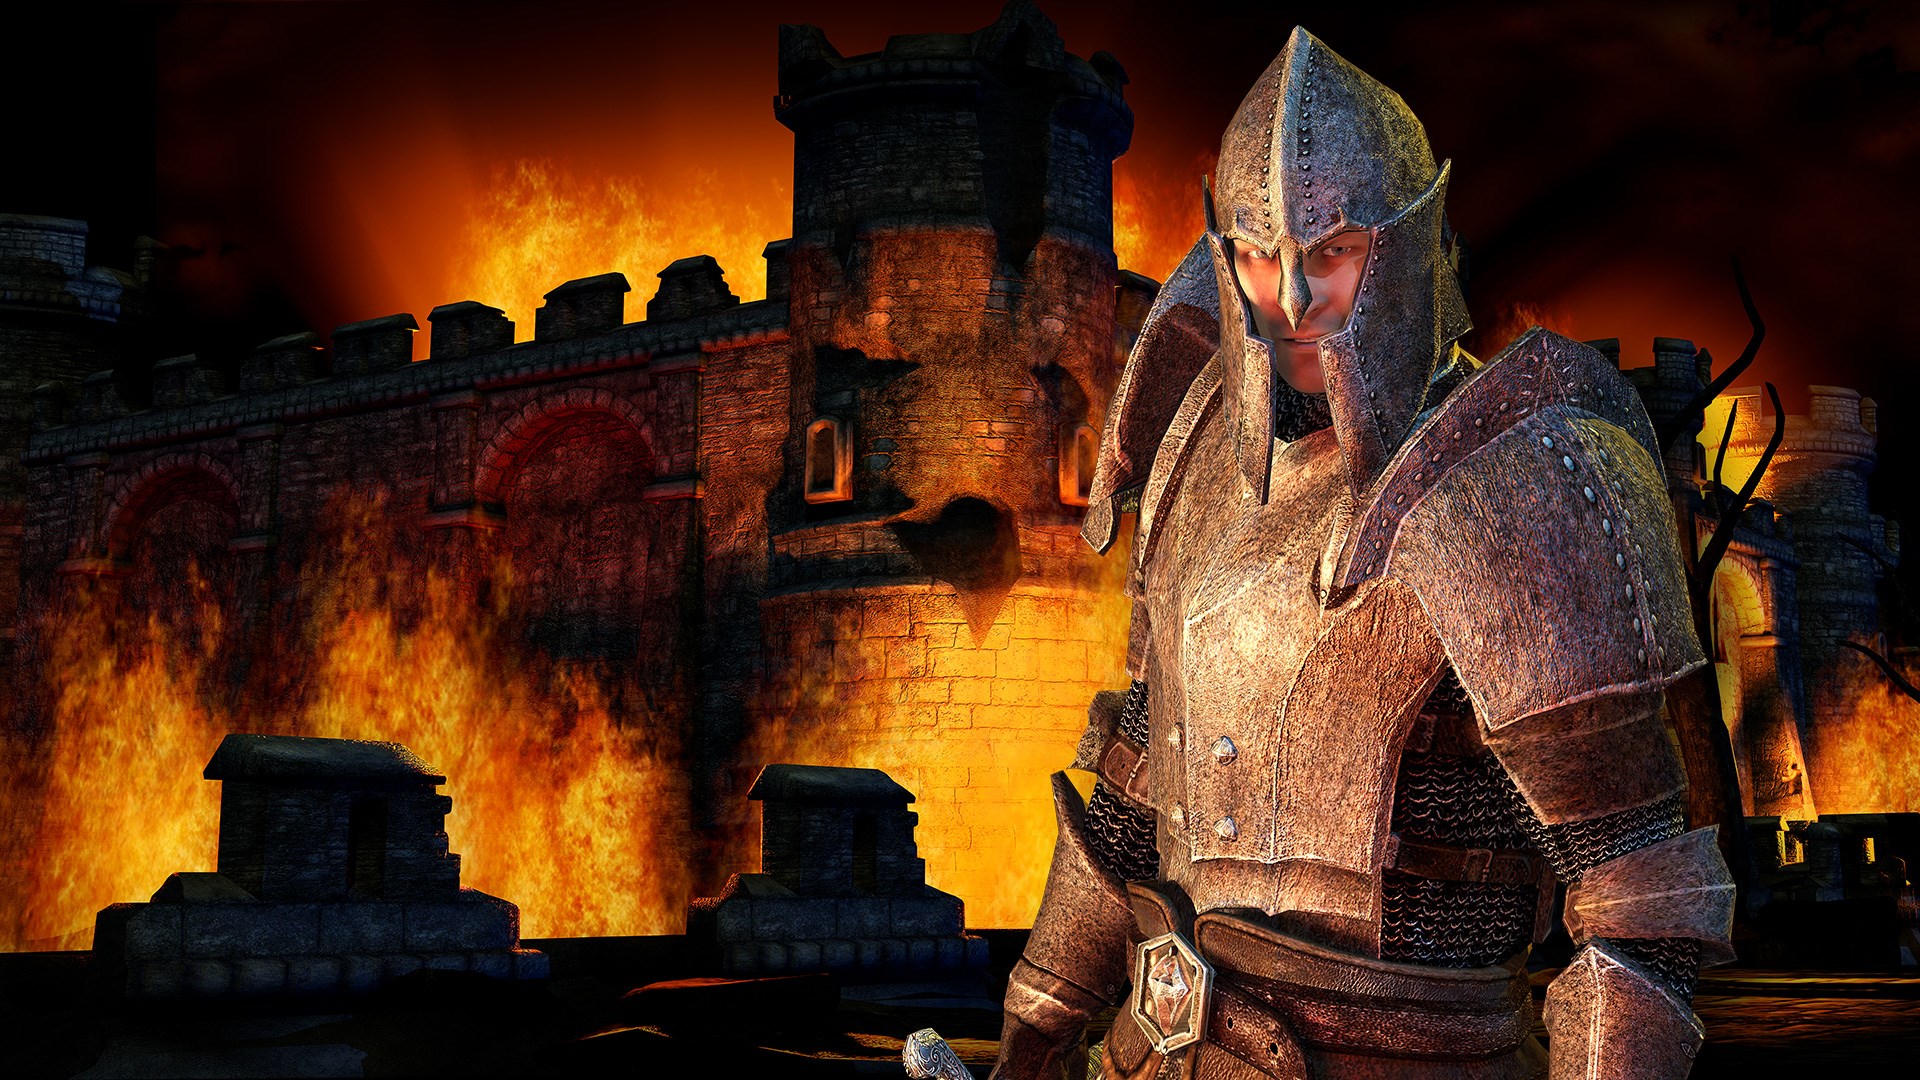 Buy The Elder Scrolls IV: Oblivion Game of the Year Edition (PC) - Microsoft Store en-IN